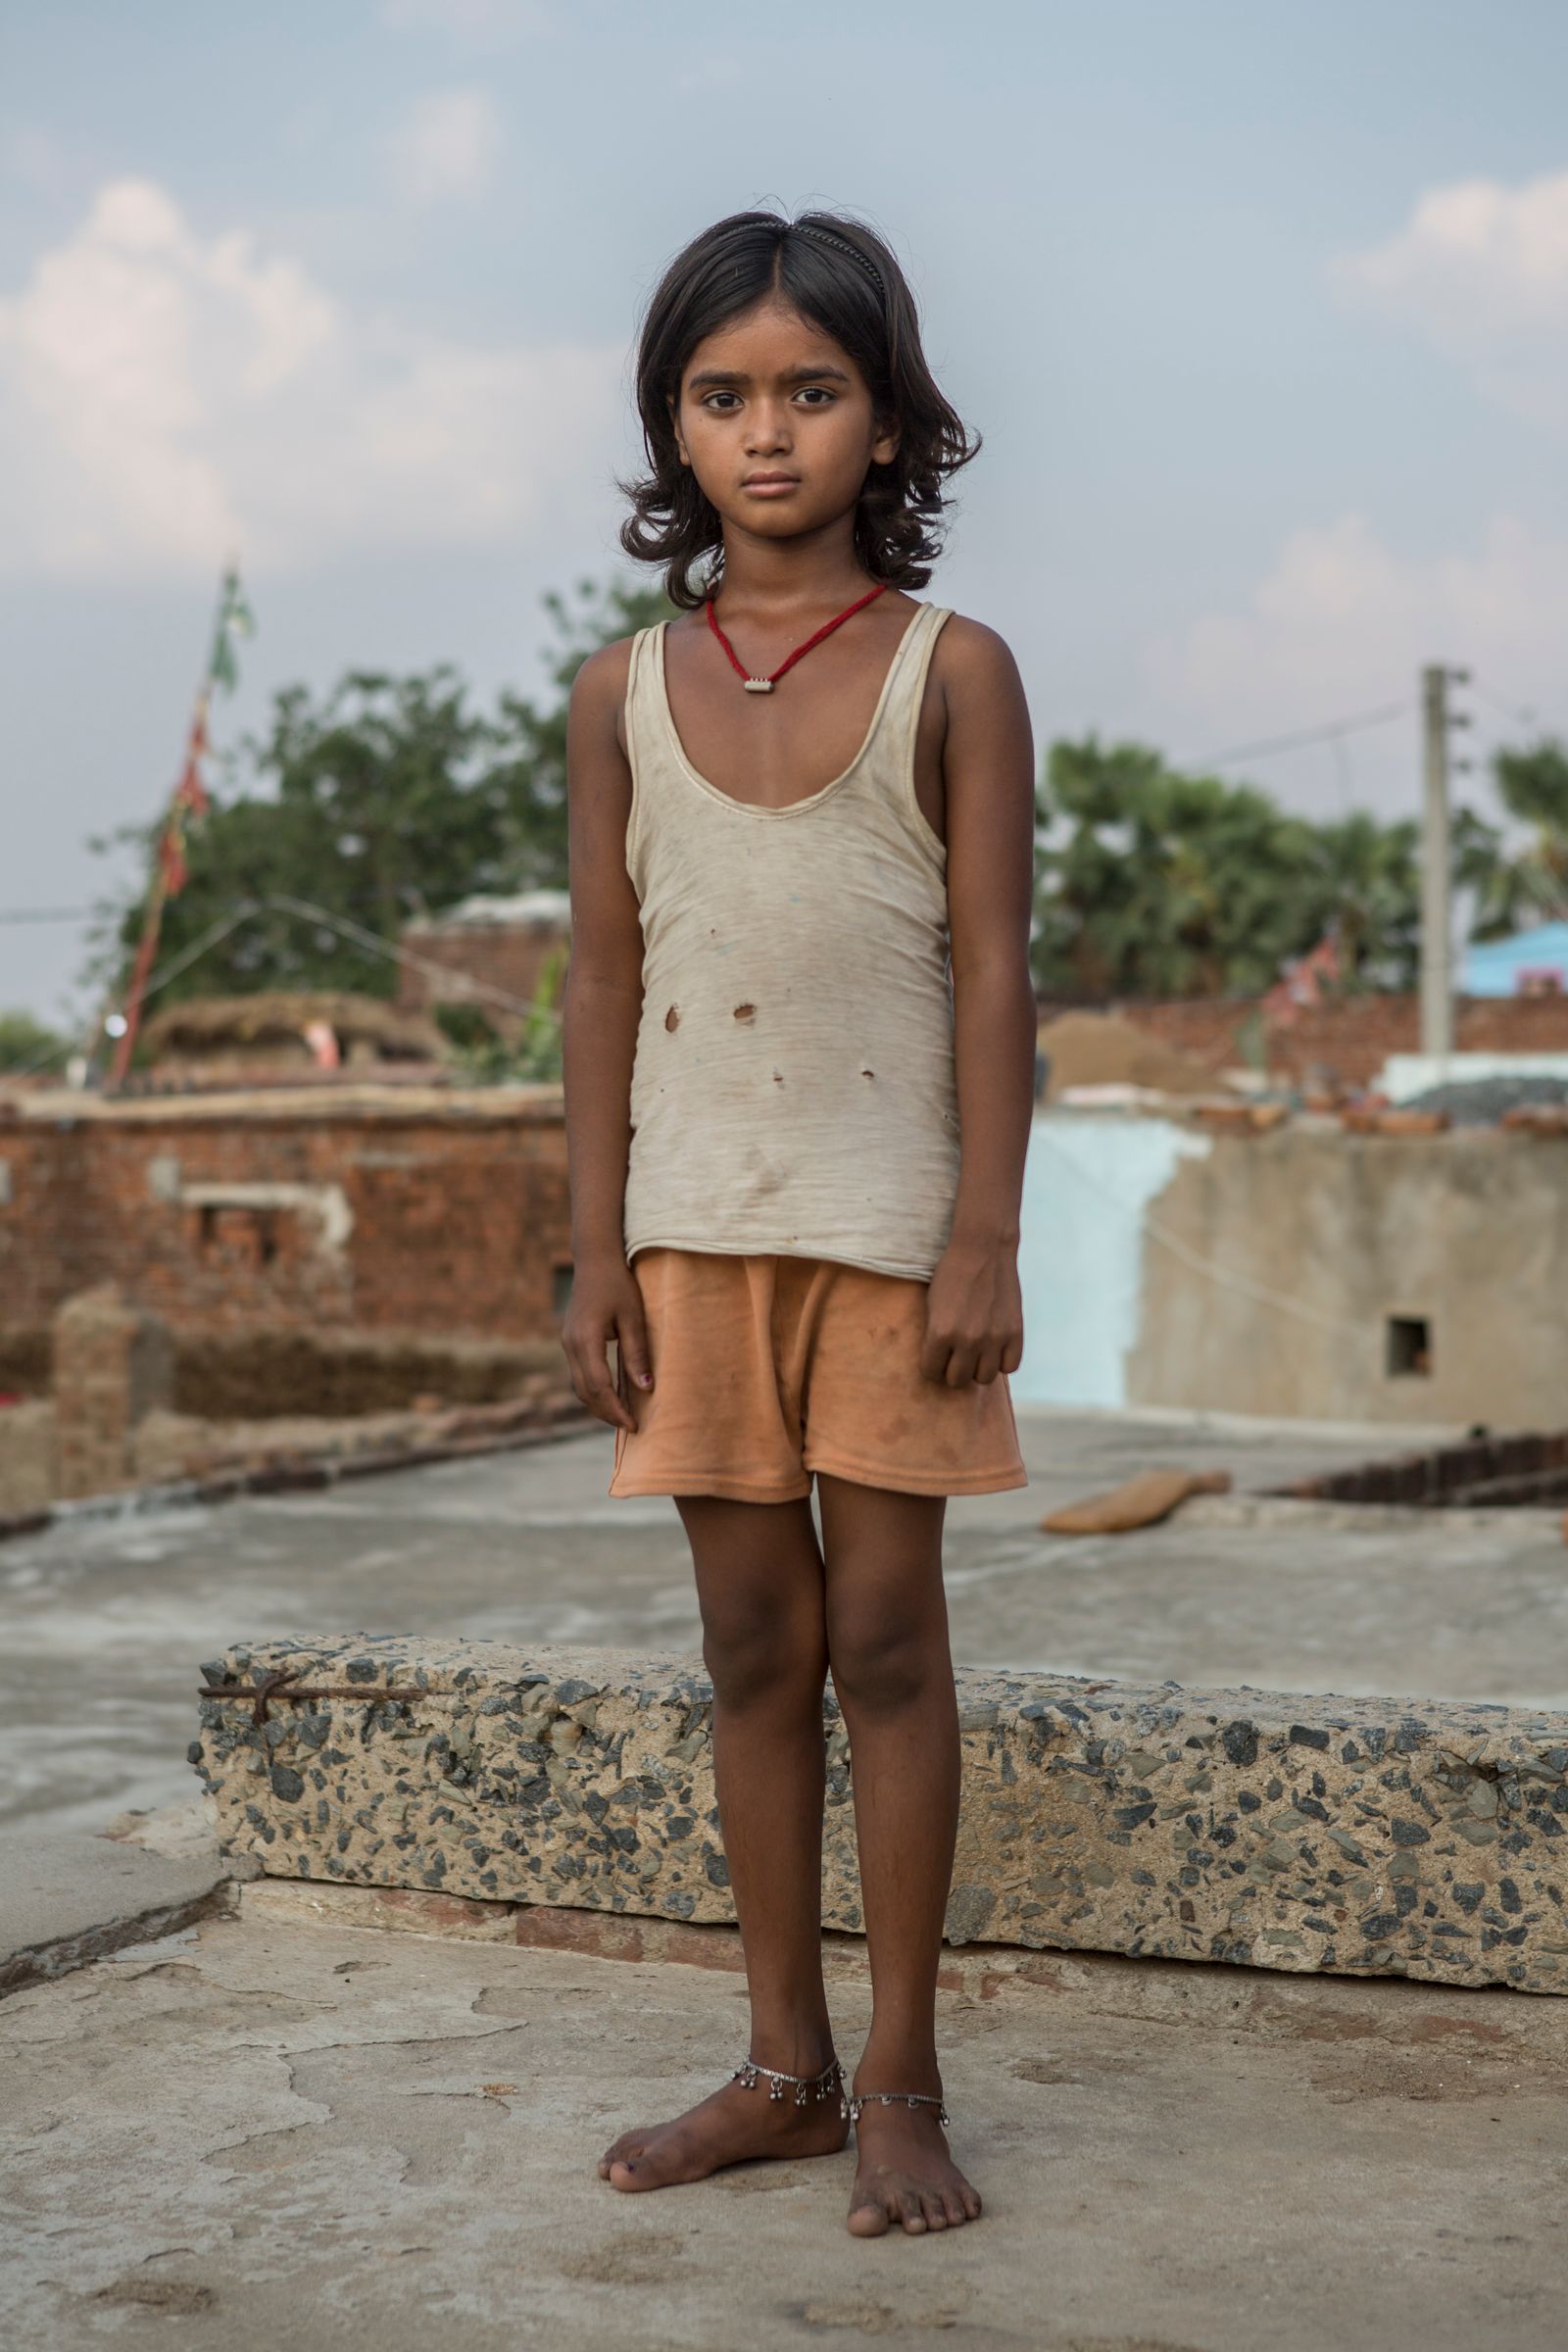 © Andy Ash - Home 38, Bihar Daily expenditure per person: $3.38